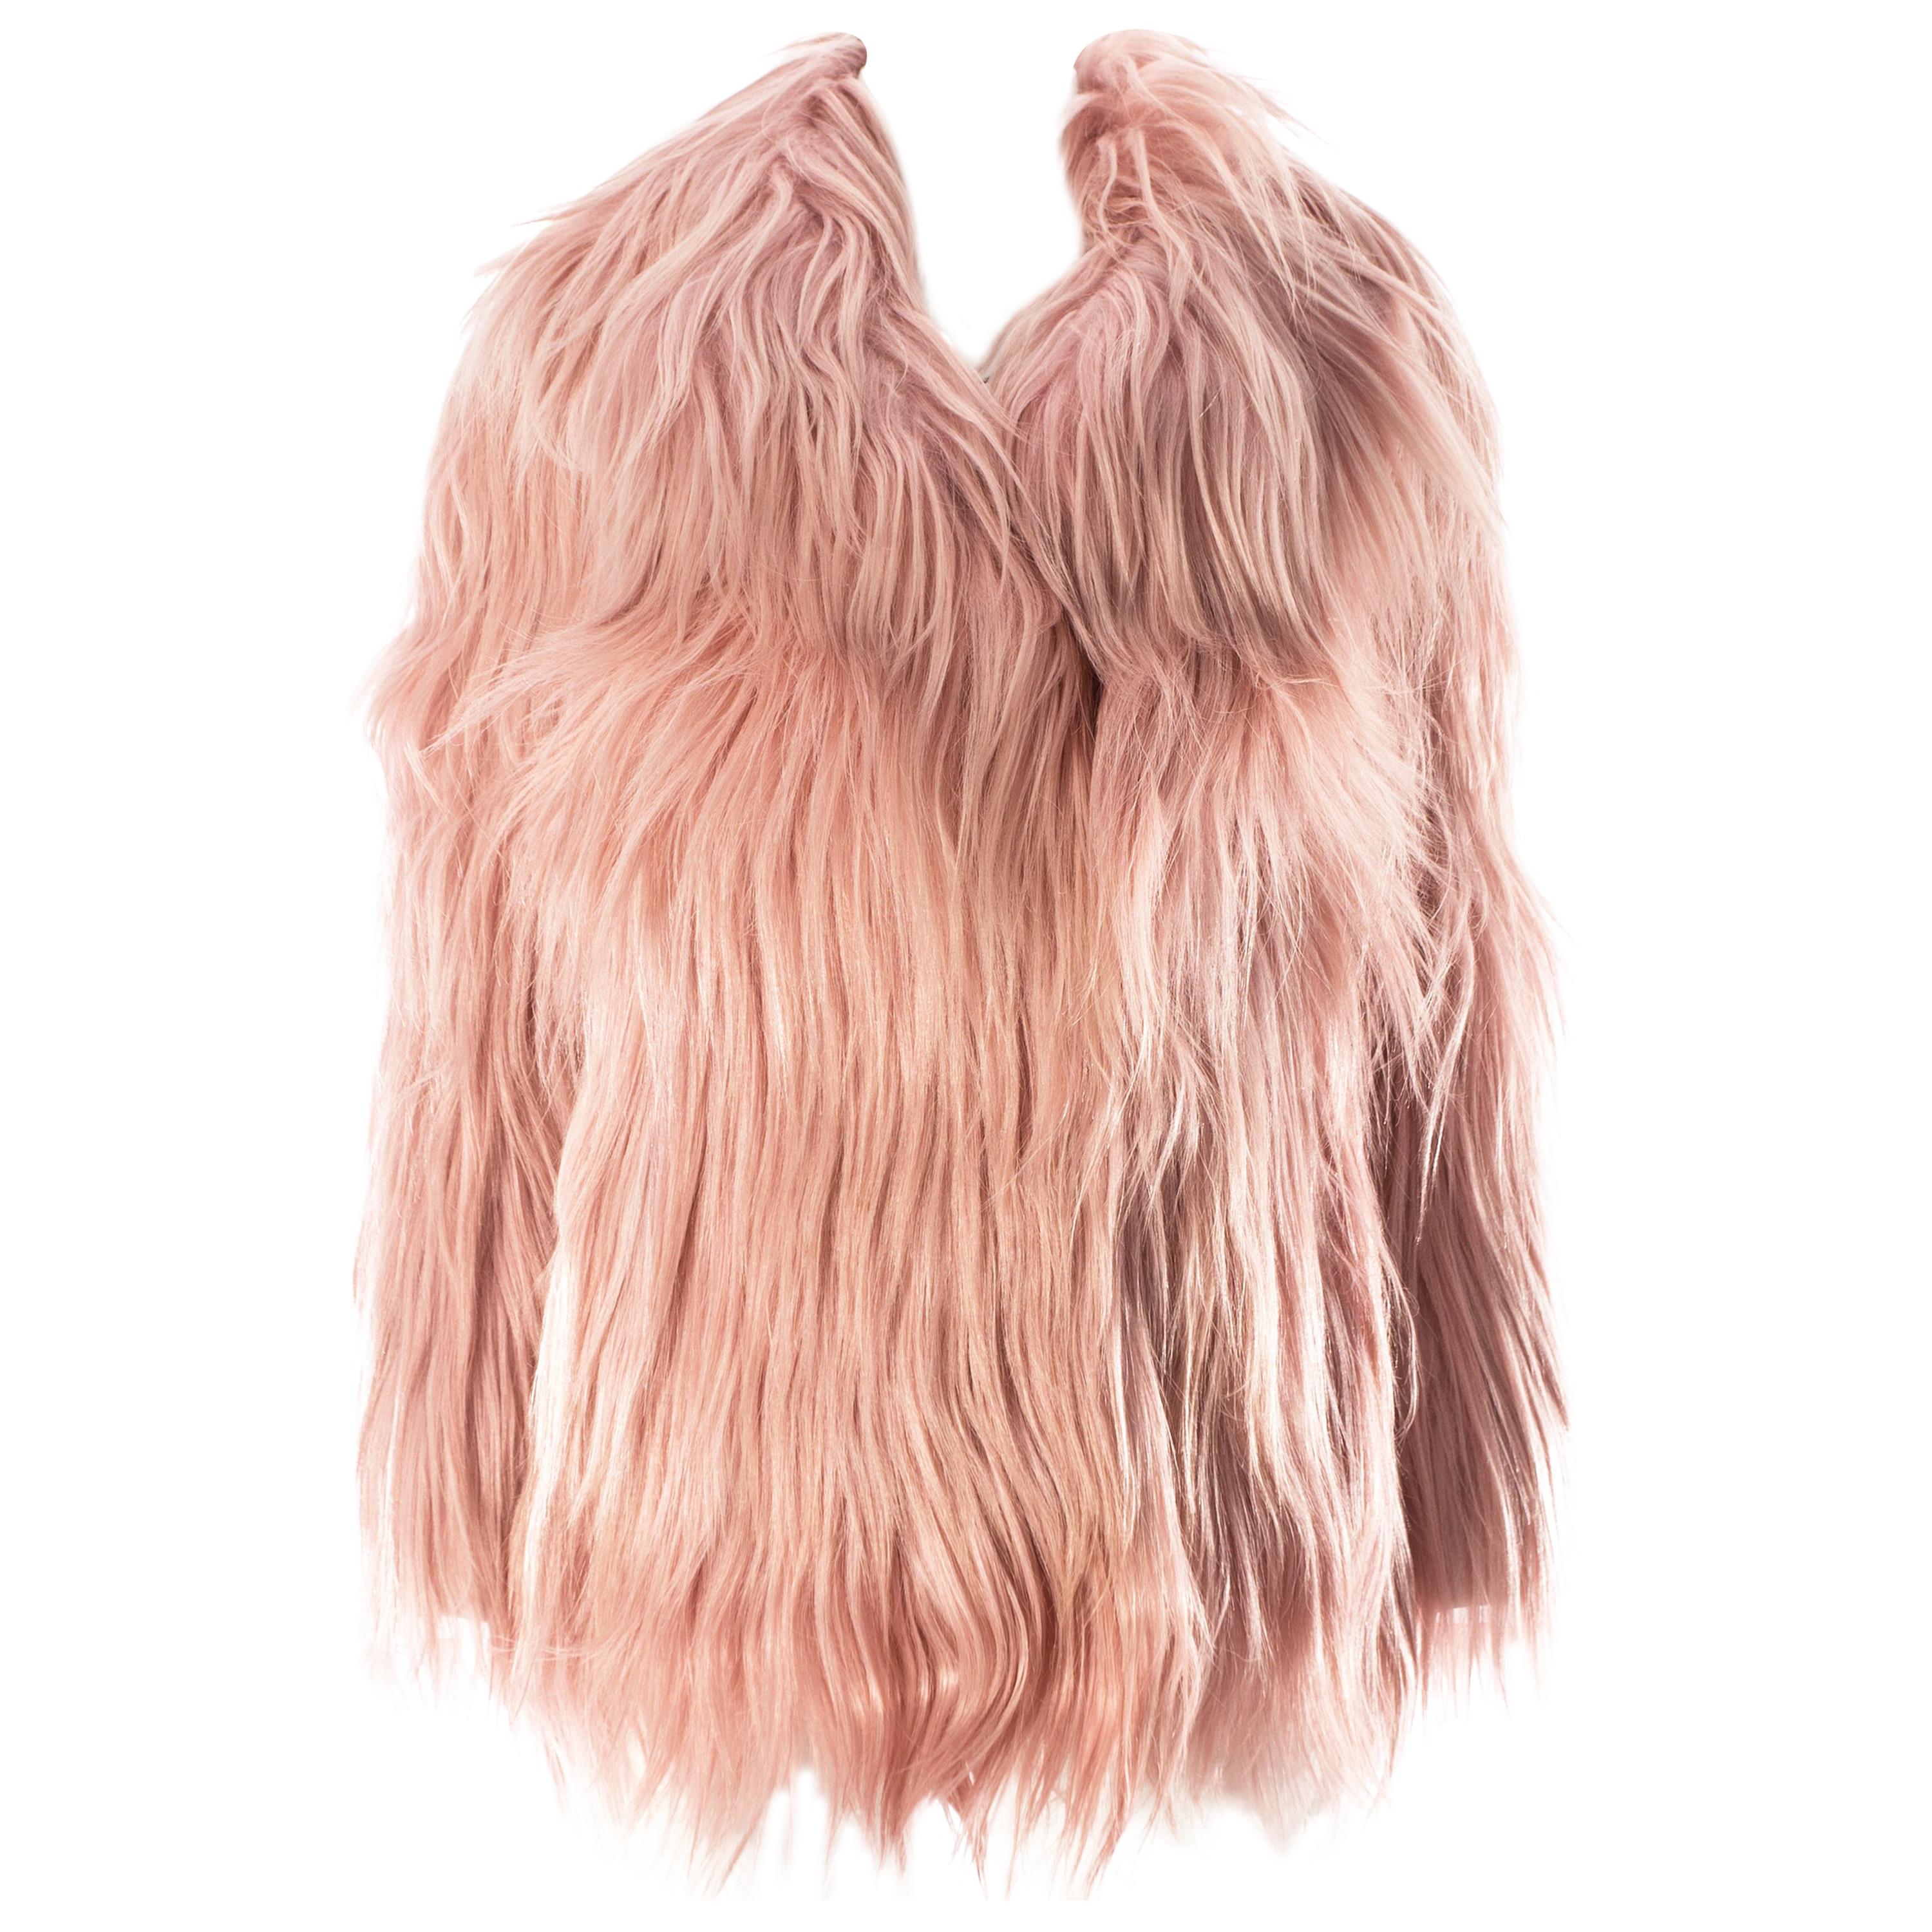 Gucci dusty pink goat hair jacket, AW 2014 